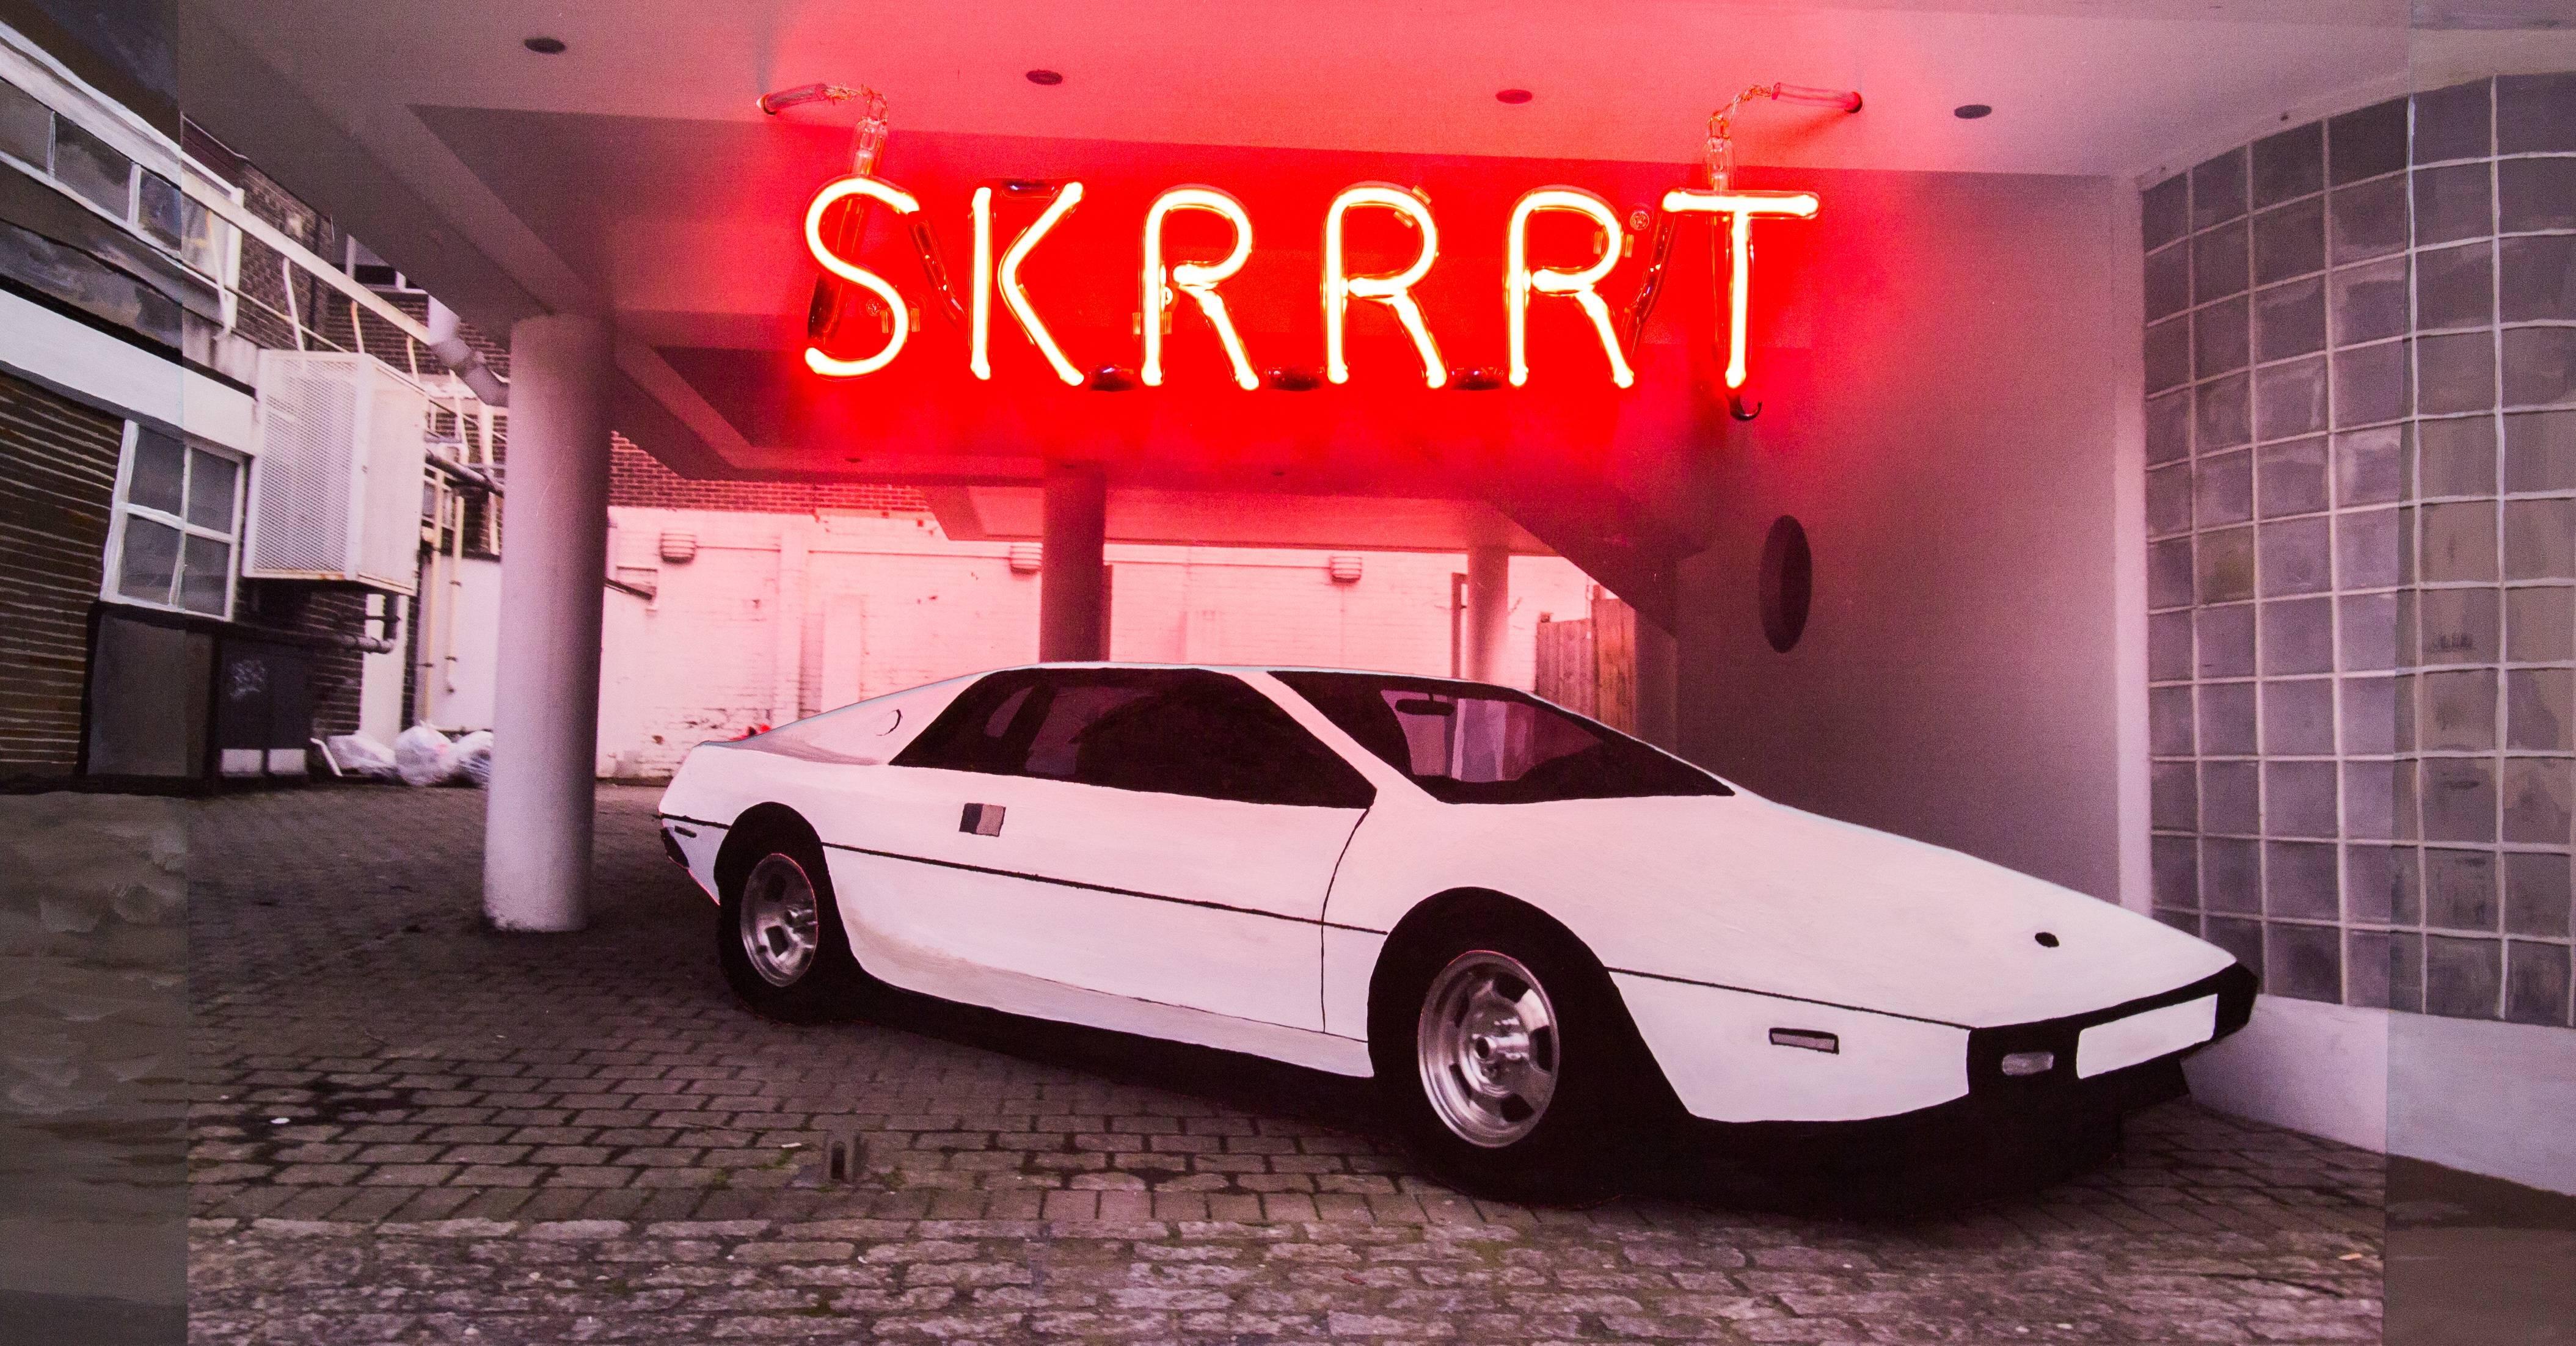 Harry Cartwright Interior Painting - SKRRRT, Original, Acrylic and Photograph on Wood, Neon,  Red, Personally Signed